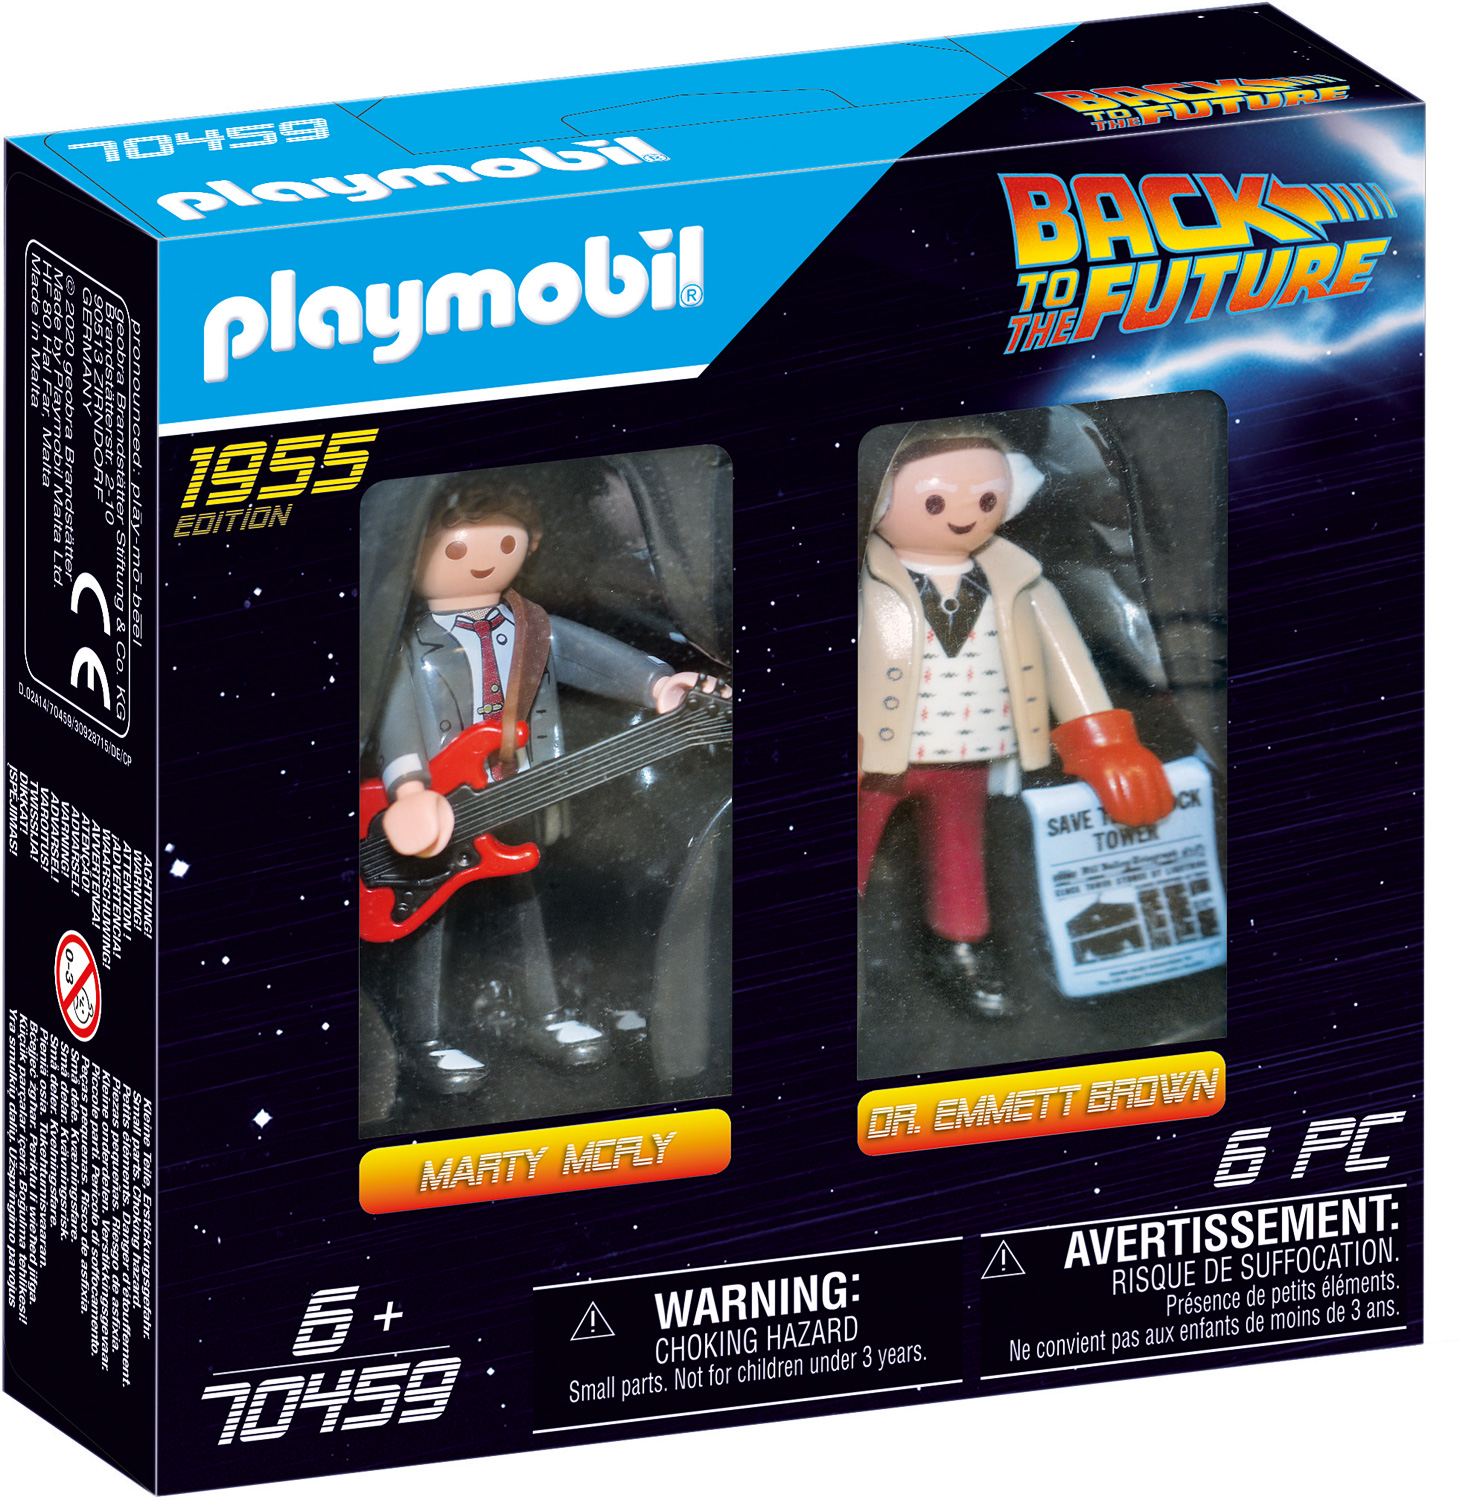 Marty And Dr Brown.NEW back to the future I Playmobil 